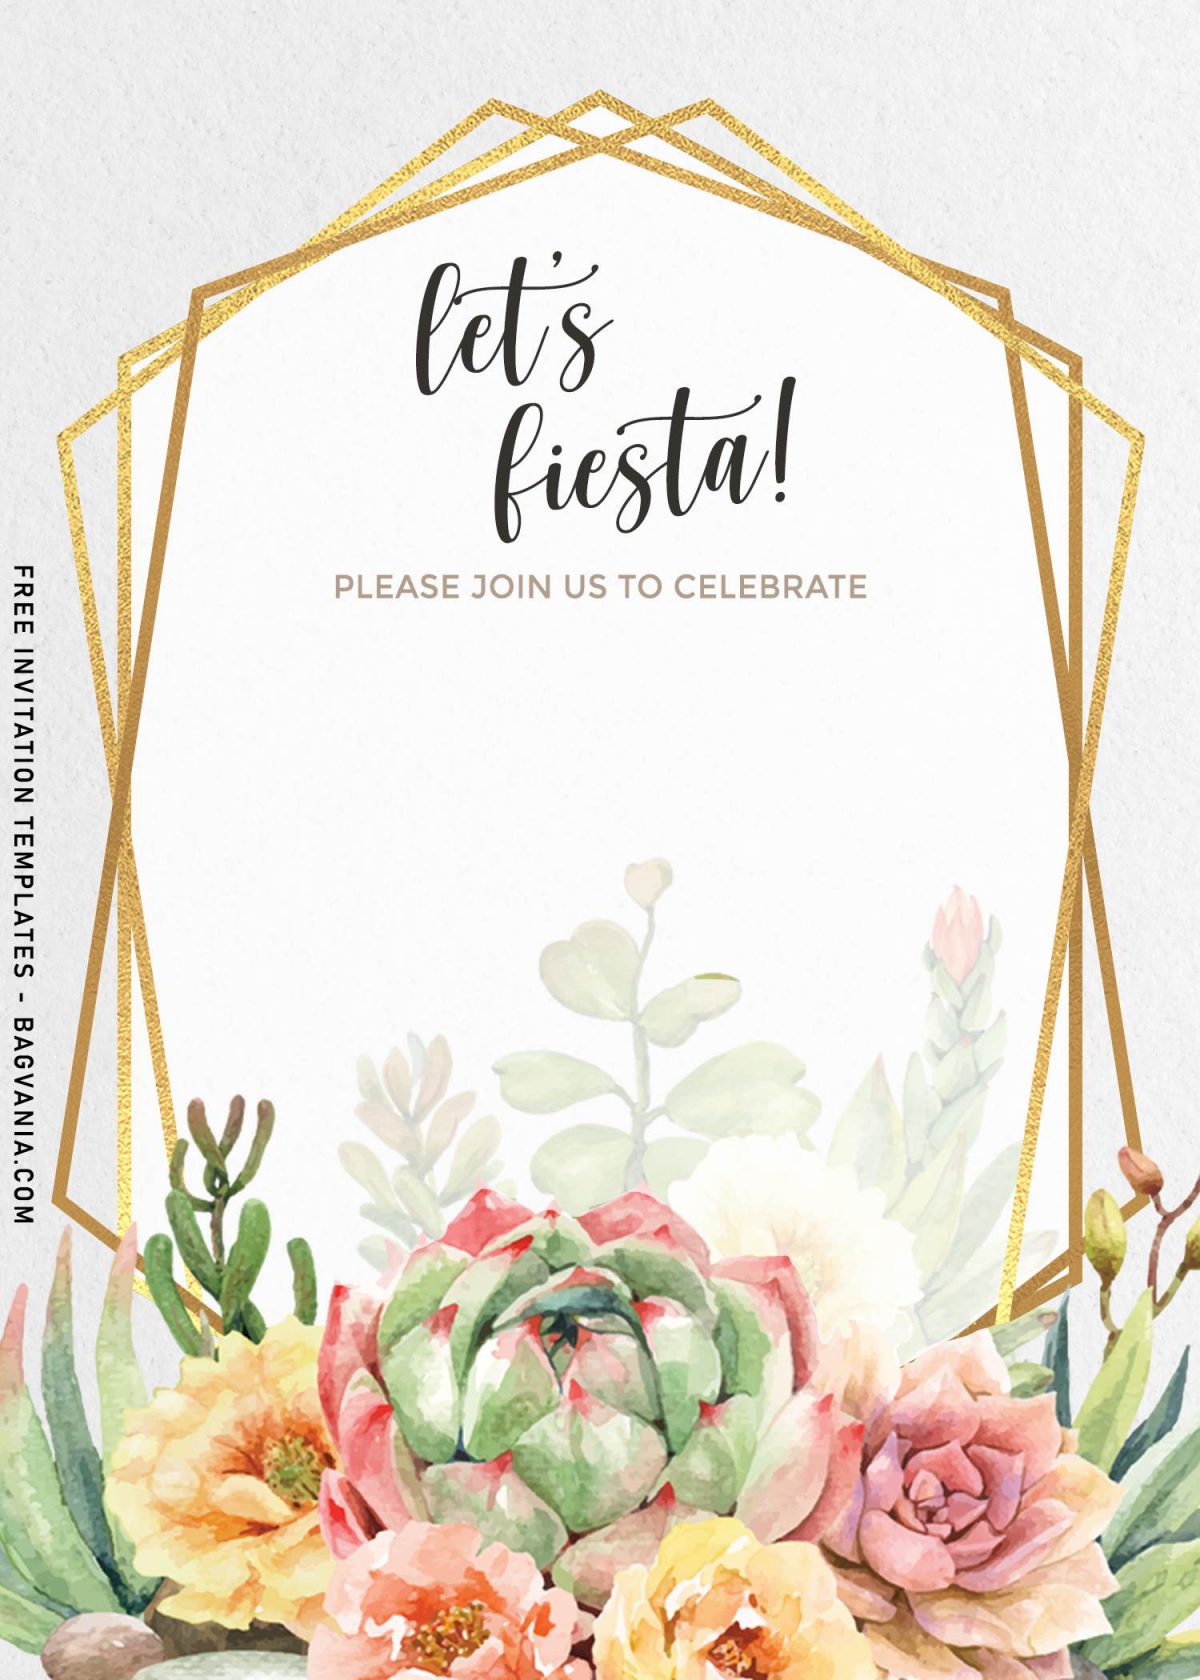 8+ Stunning Cactus Watercolor Geometric Birthday Invitation Templates and has exotic cactus painting